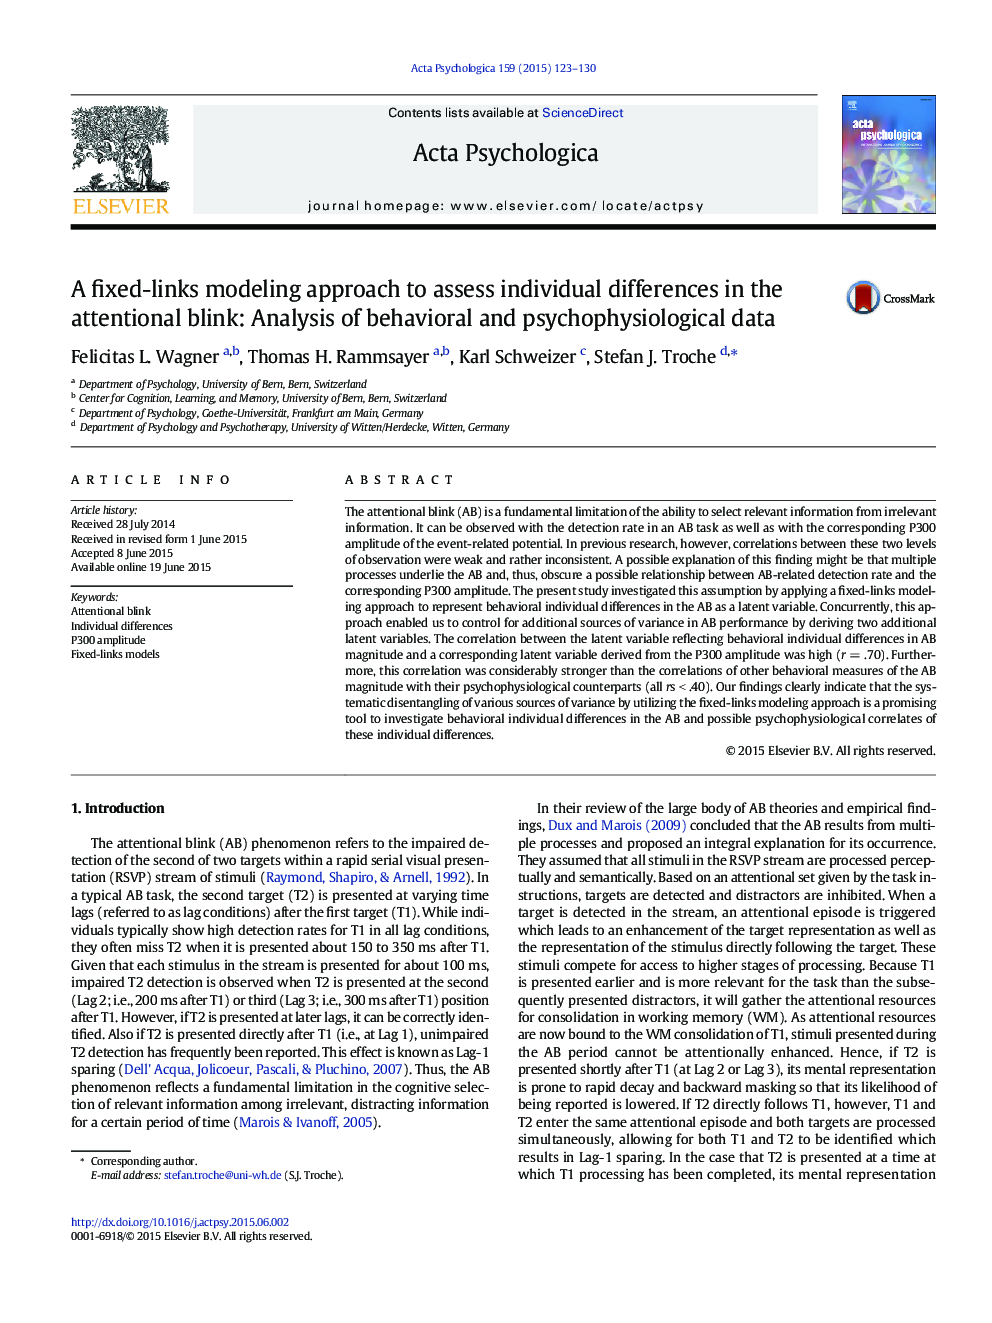 A fixed-links modeling approach to assess individual differences in the attentional blink: Analysis of behavioral and psychophysiological data